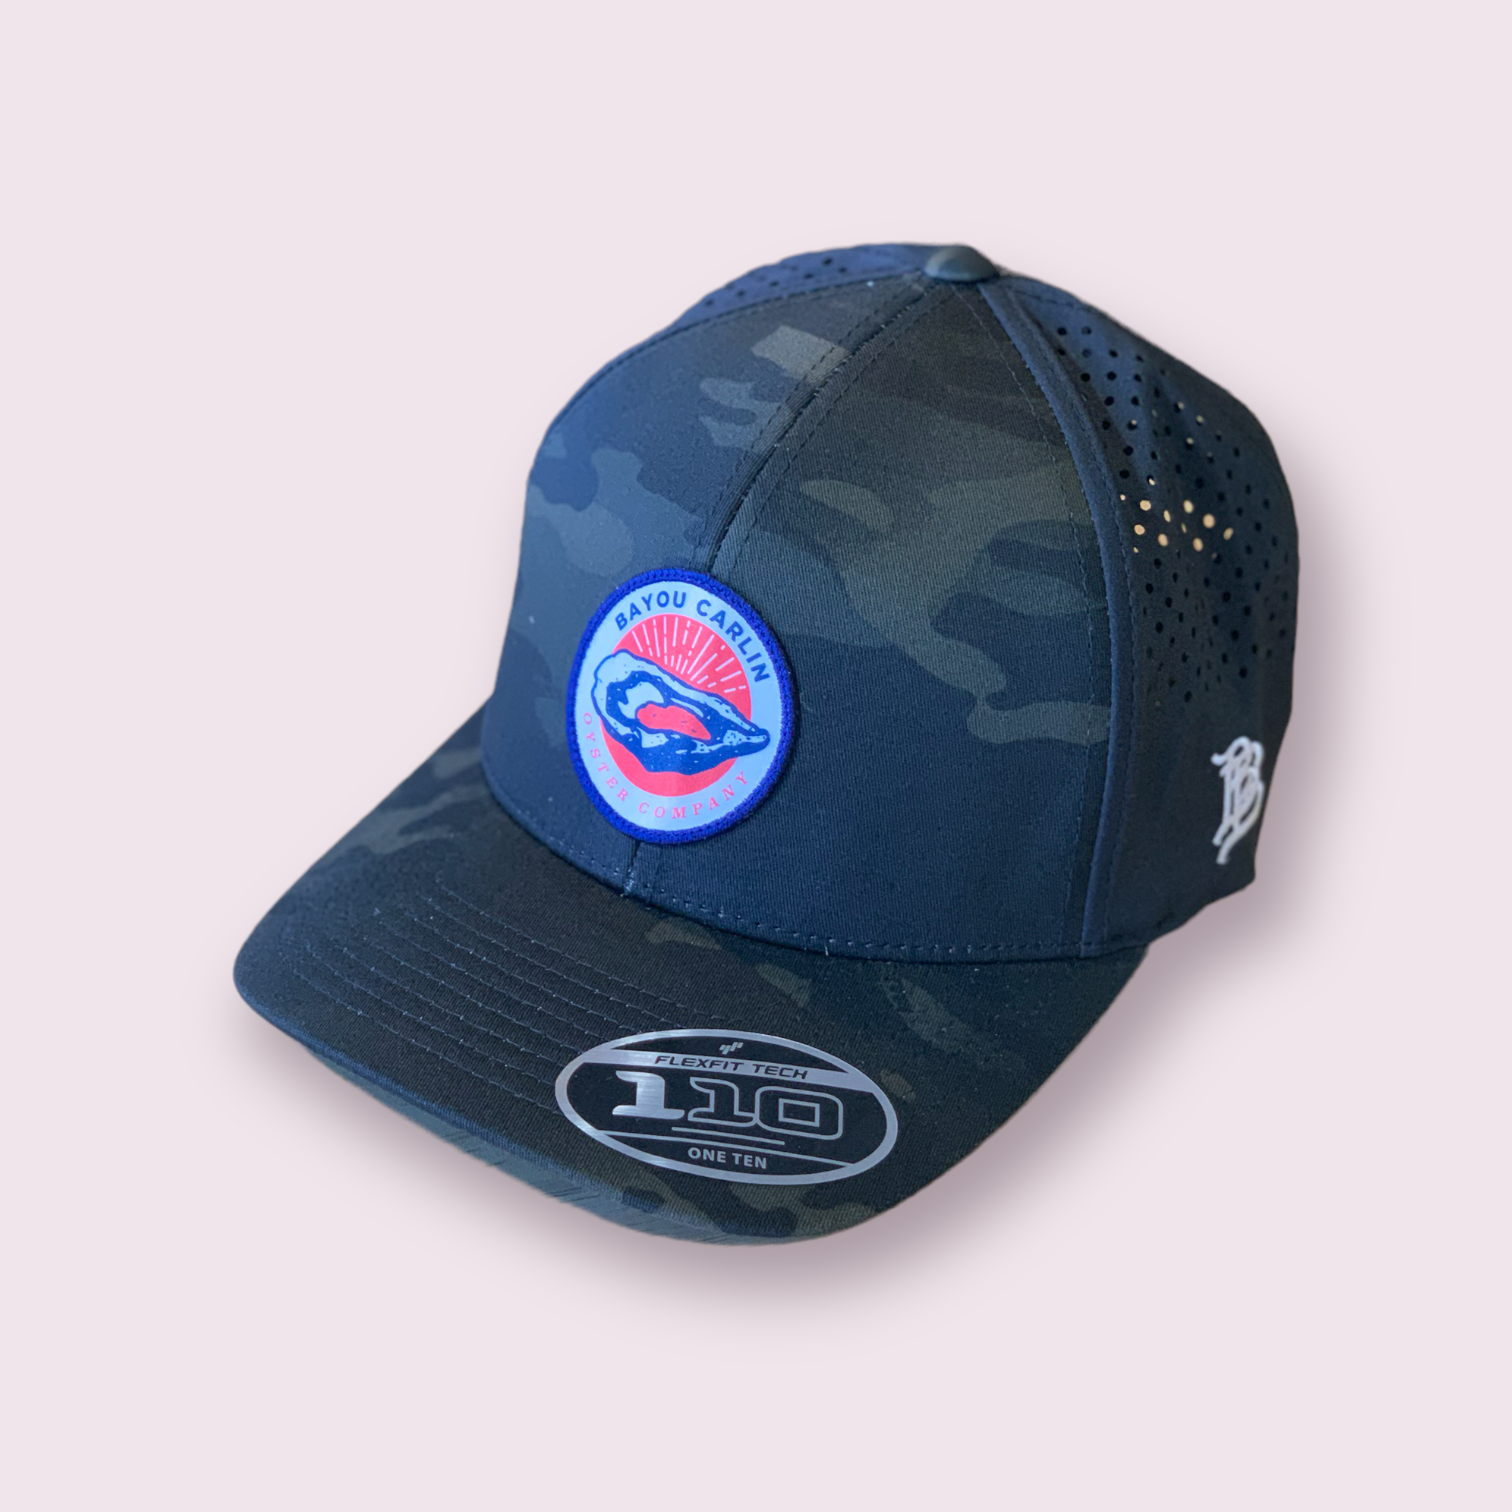 Patch - Performance – Trucker Carlin MultiCa Oyster Logo Hat Black Sublimated Bayou - Curved